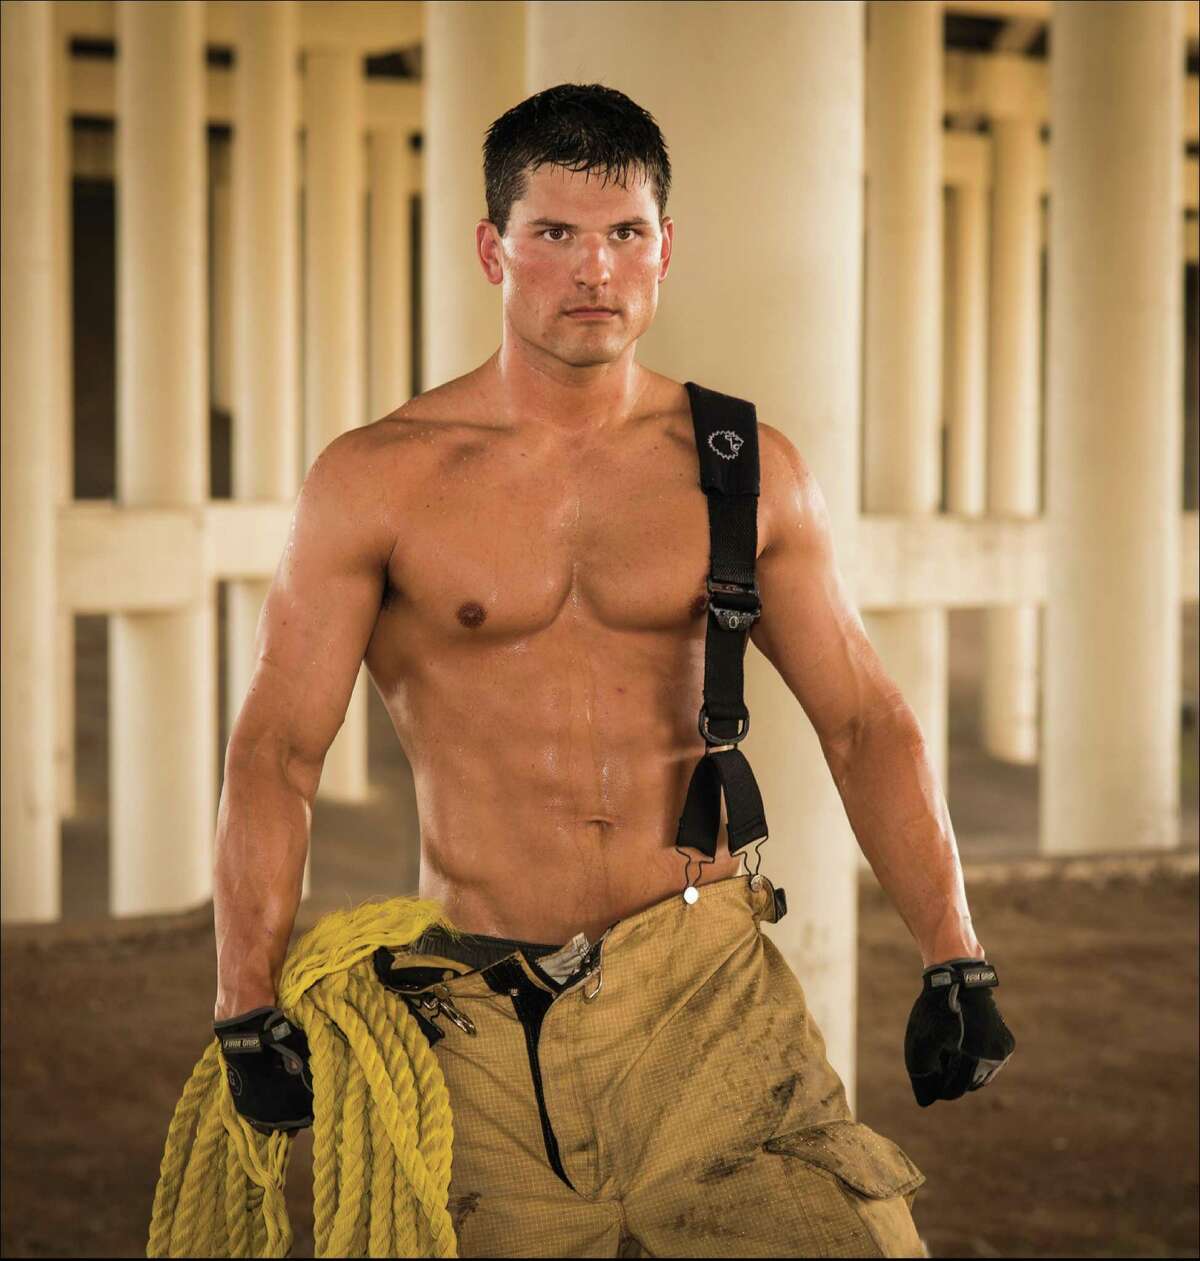 Mr. July Phillip Baird is ready to rescue. He's one of the firefighters featured in the 2015 calendar that benefits the Burned Children's Fund.